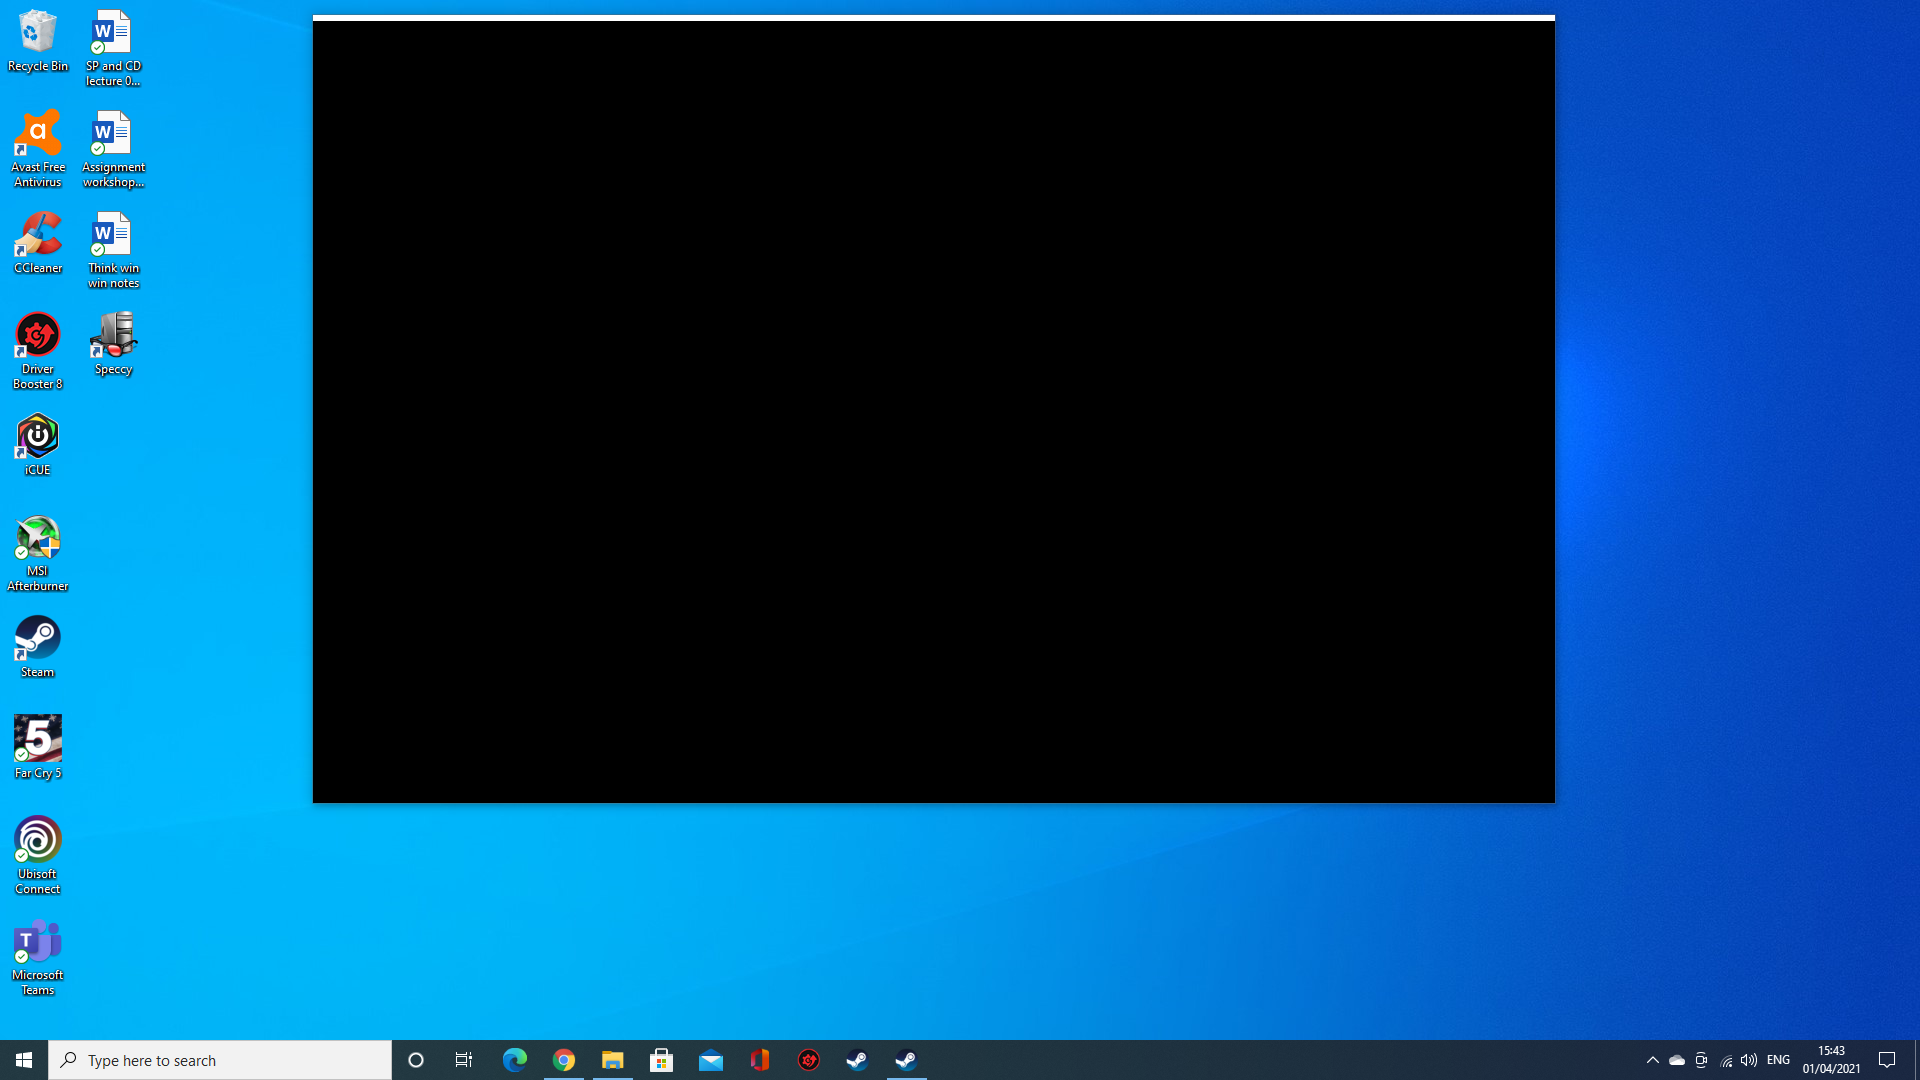 Black box with white bar always on Windows 10 desktop screen can't get rid of it. What is it? b15138e2-8ea8-4b74-9399-ac2b3eb56c1f?upload=true.png